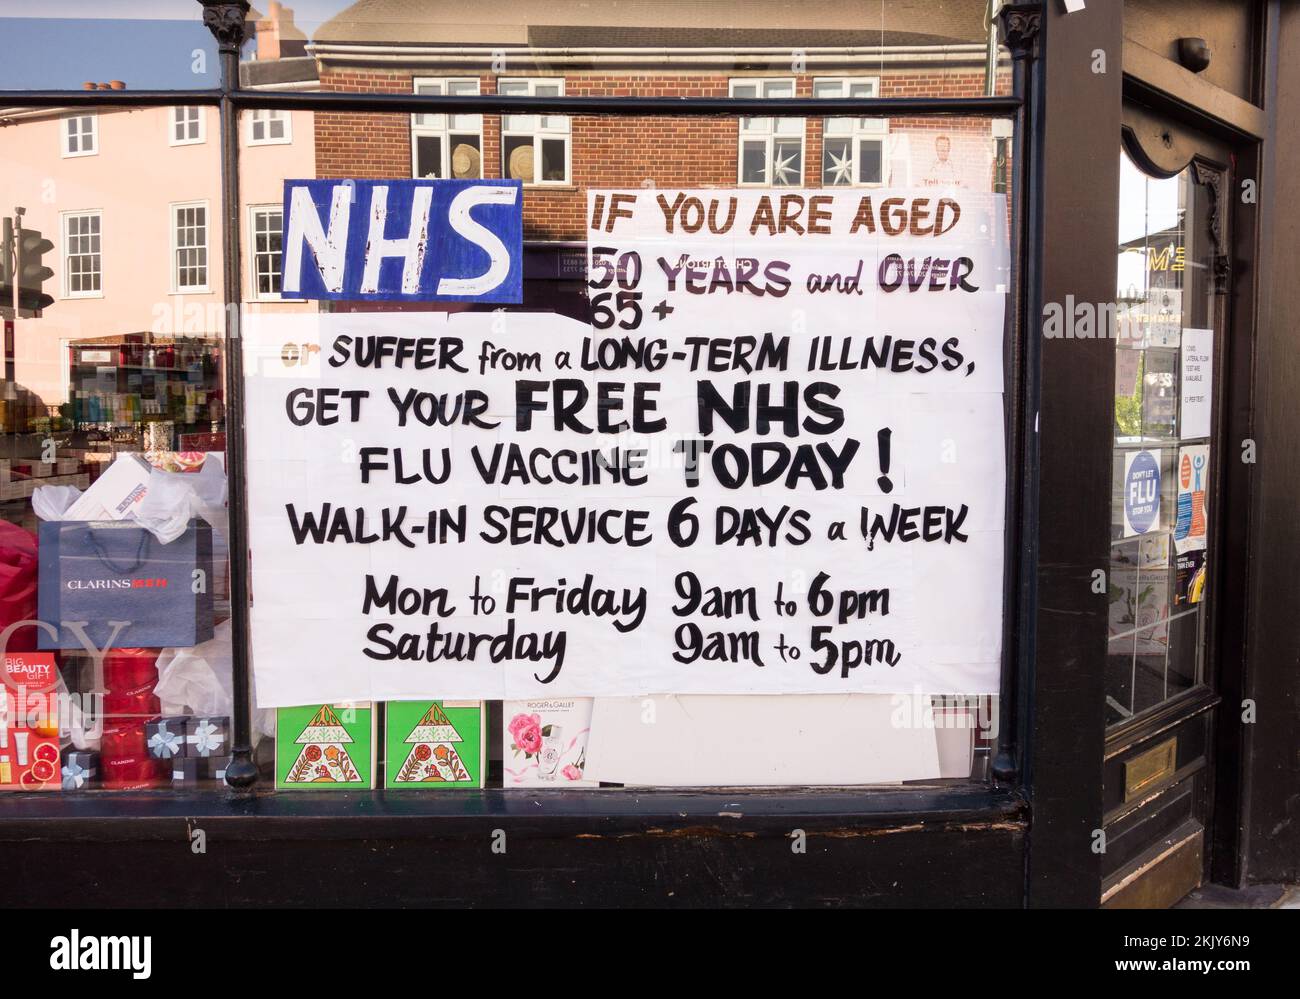 A large, hand written, NHS Free Flu Vaccine advertisement  for the over 50s in a Chemist's shop window in London, England, UK Stock Photo